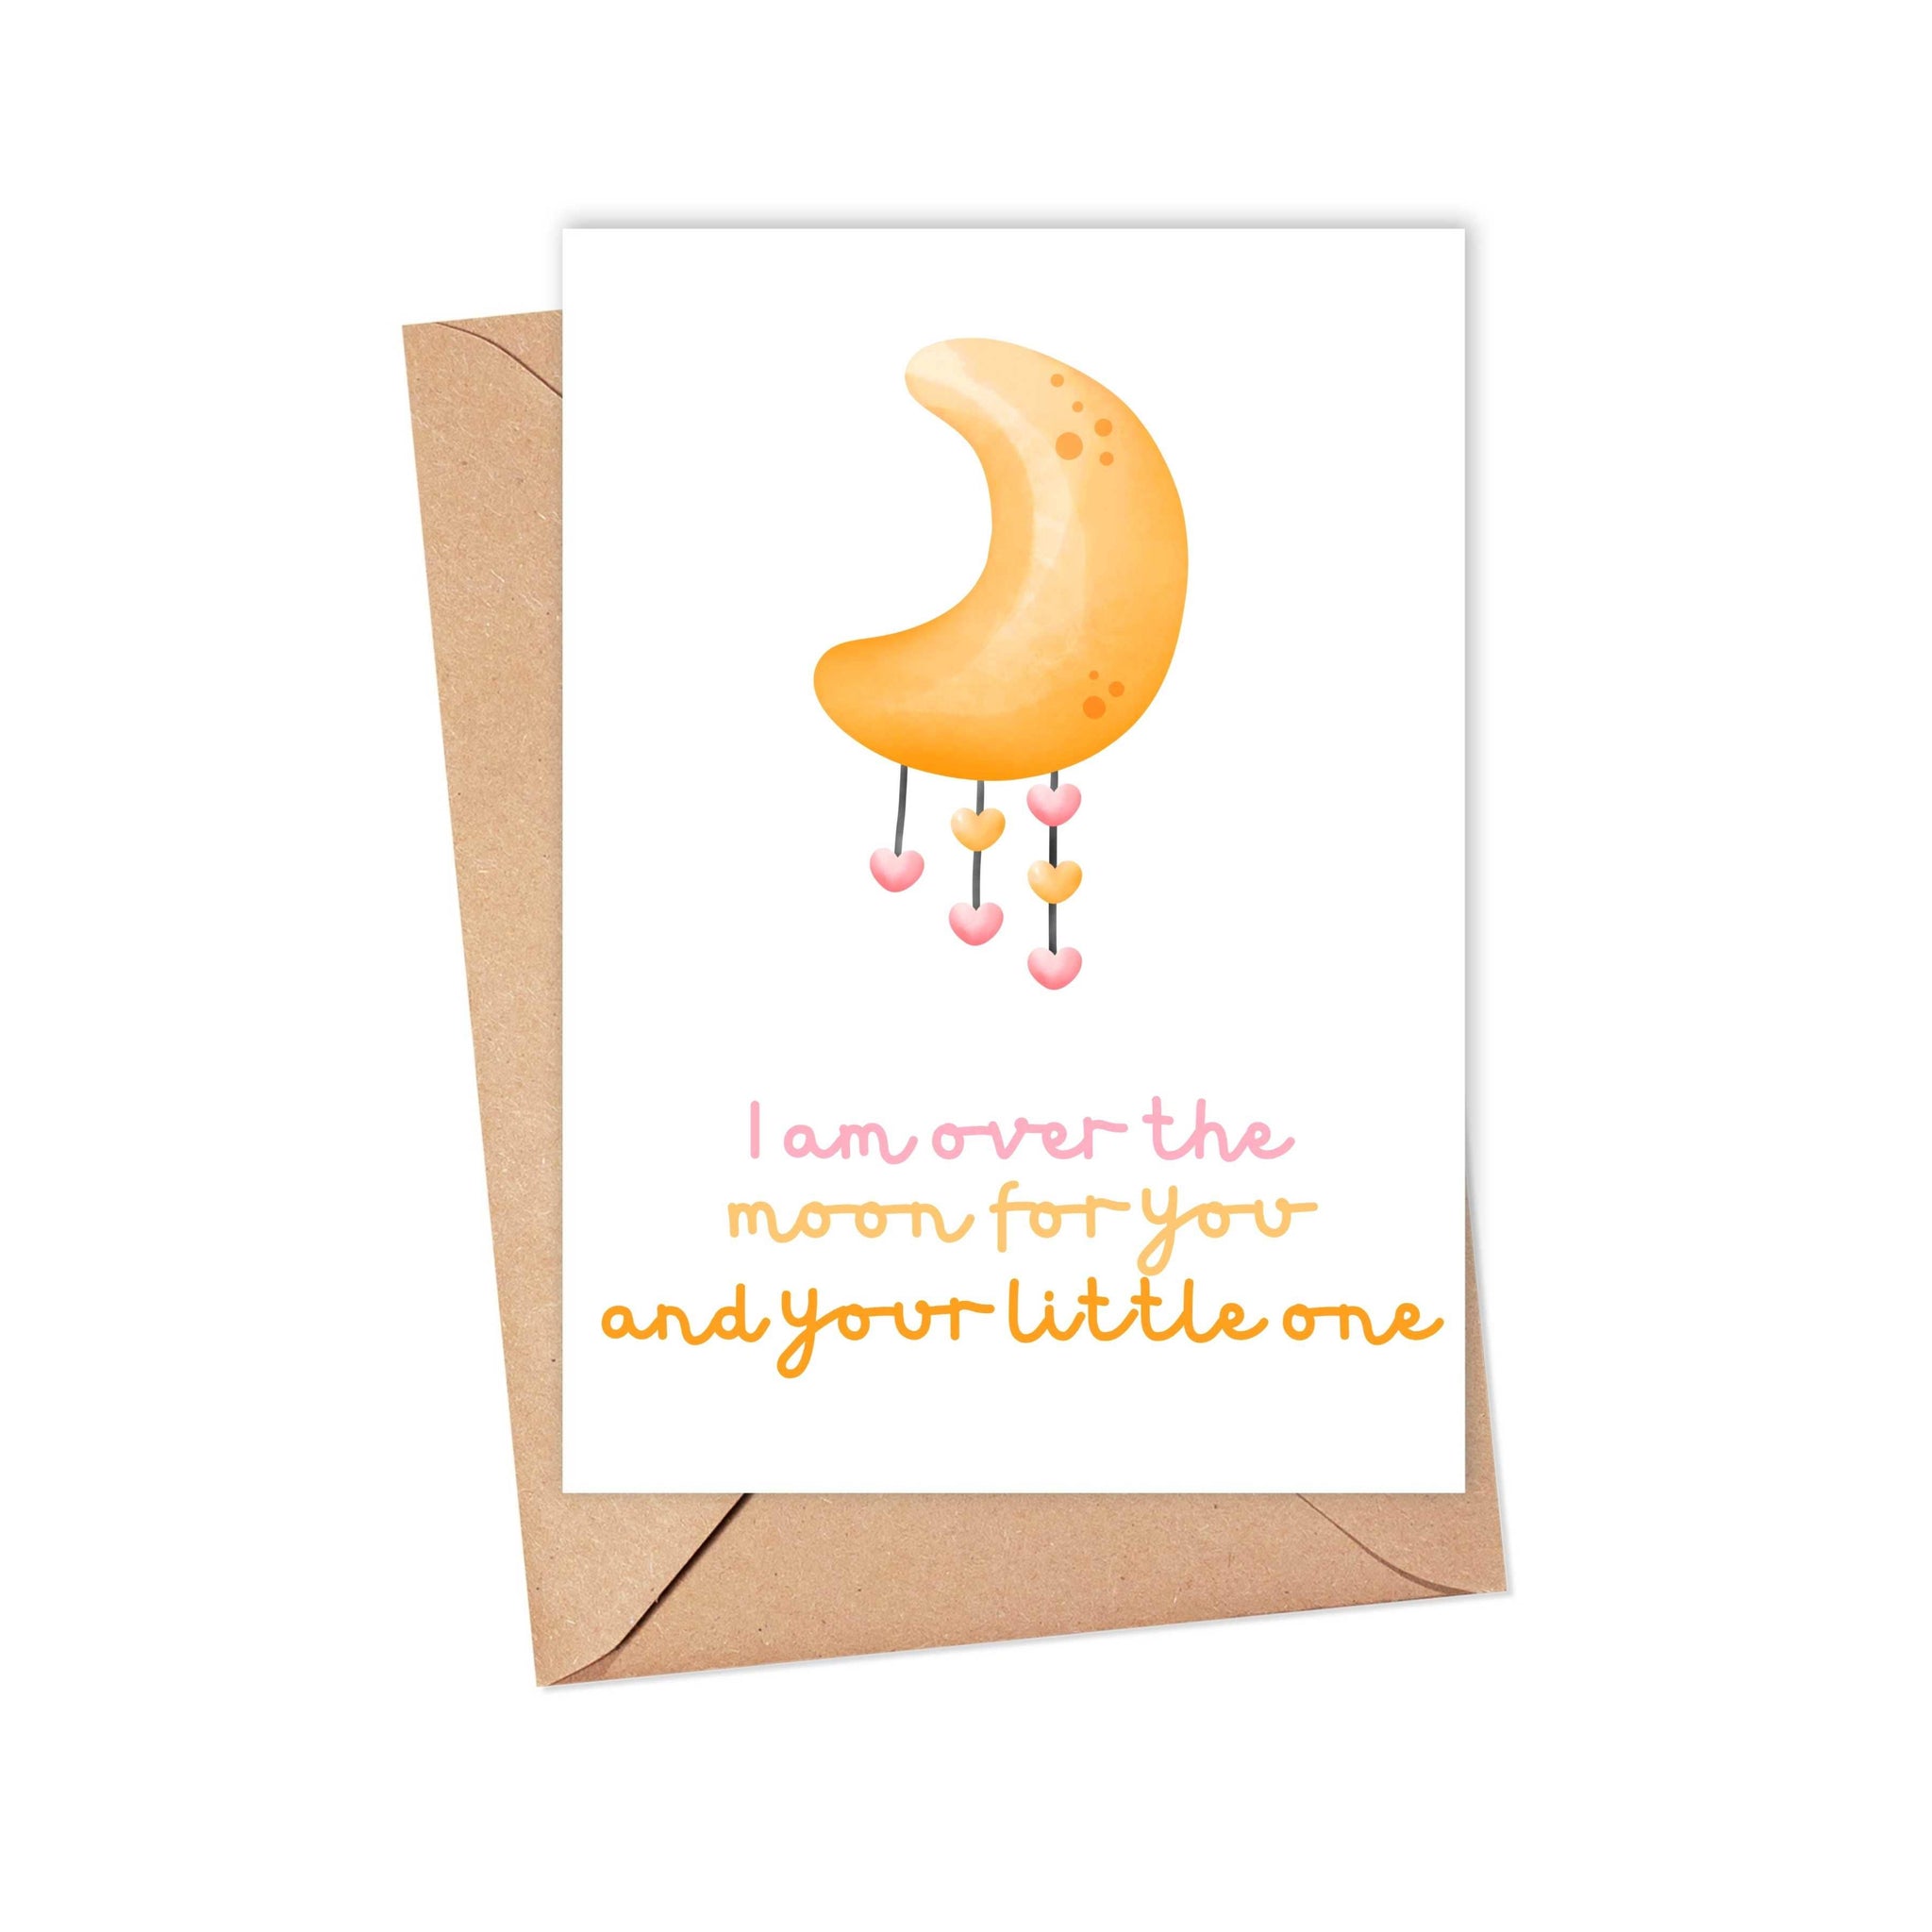 Over the Moon Cute Baby Card for Expectant Mothers